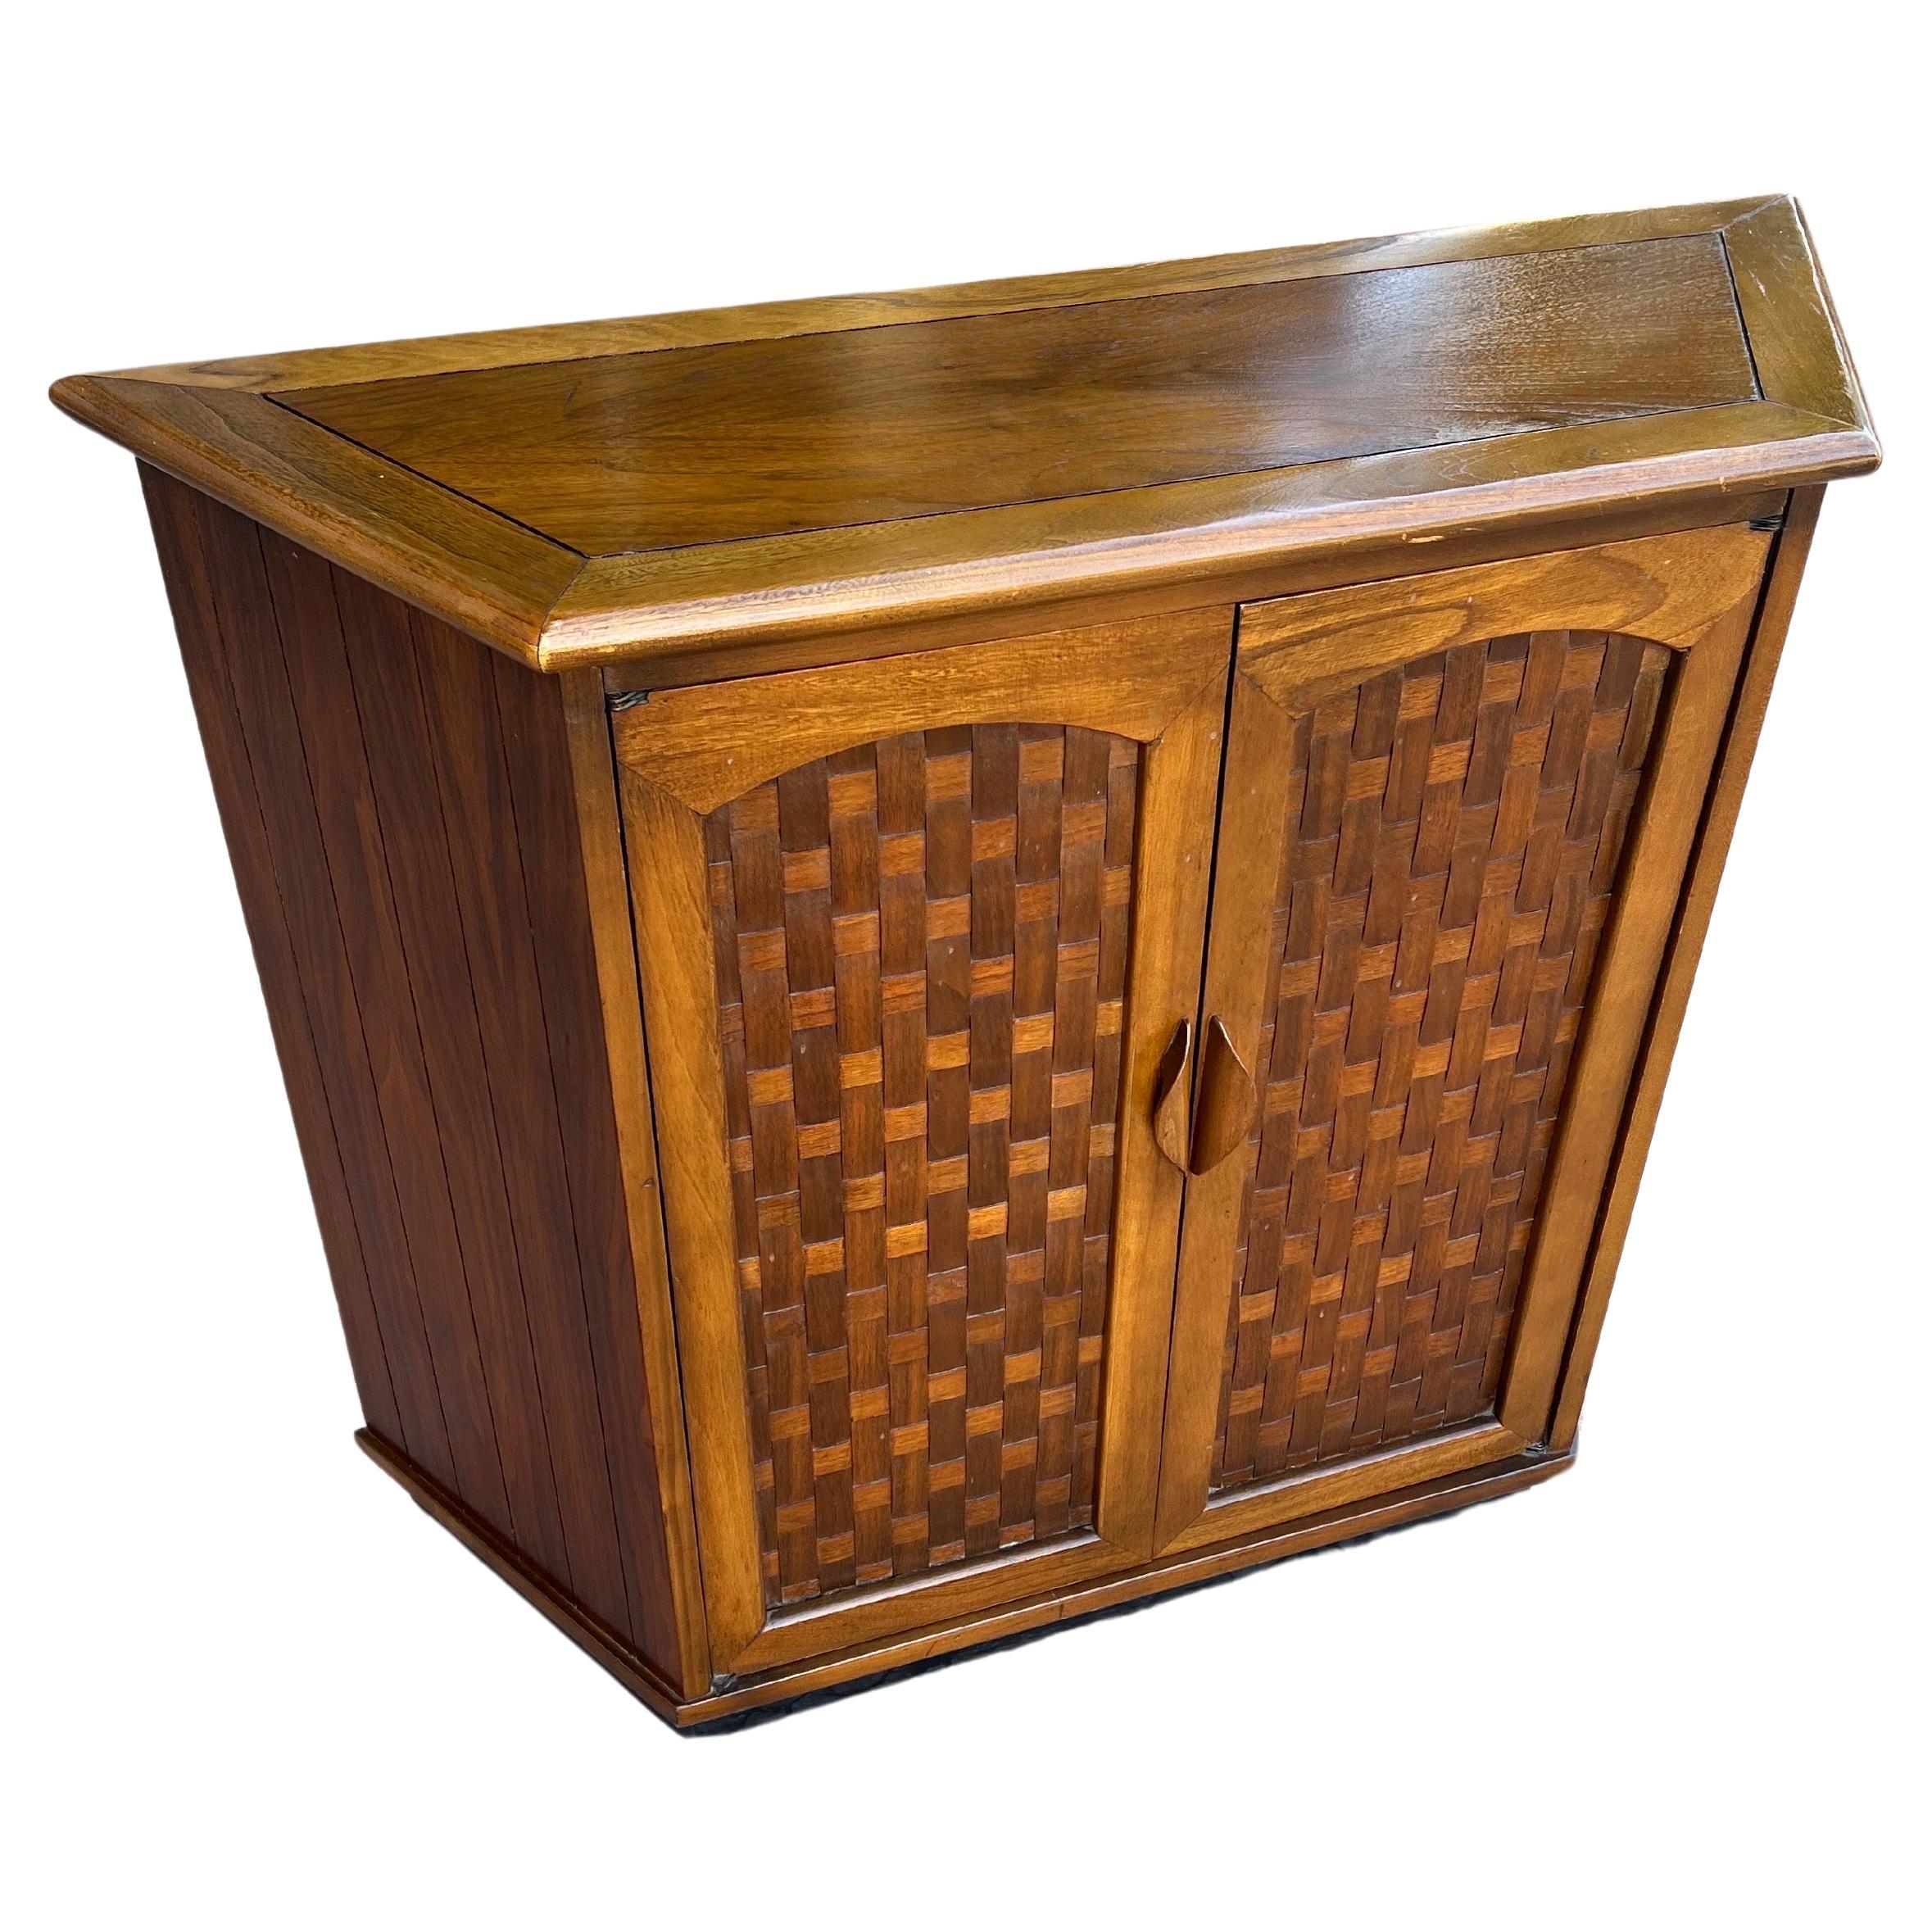 20th Century American Mid Century Modern Walnut Small Entry Cabinet Basket Weave Front